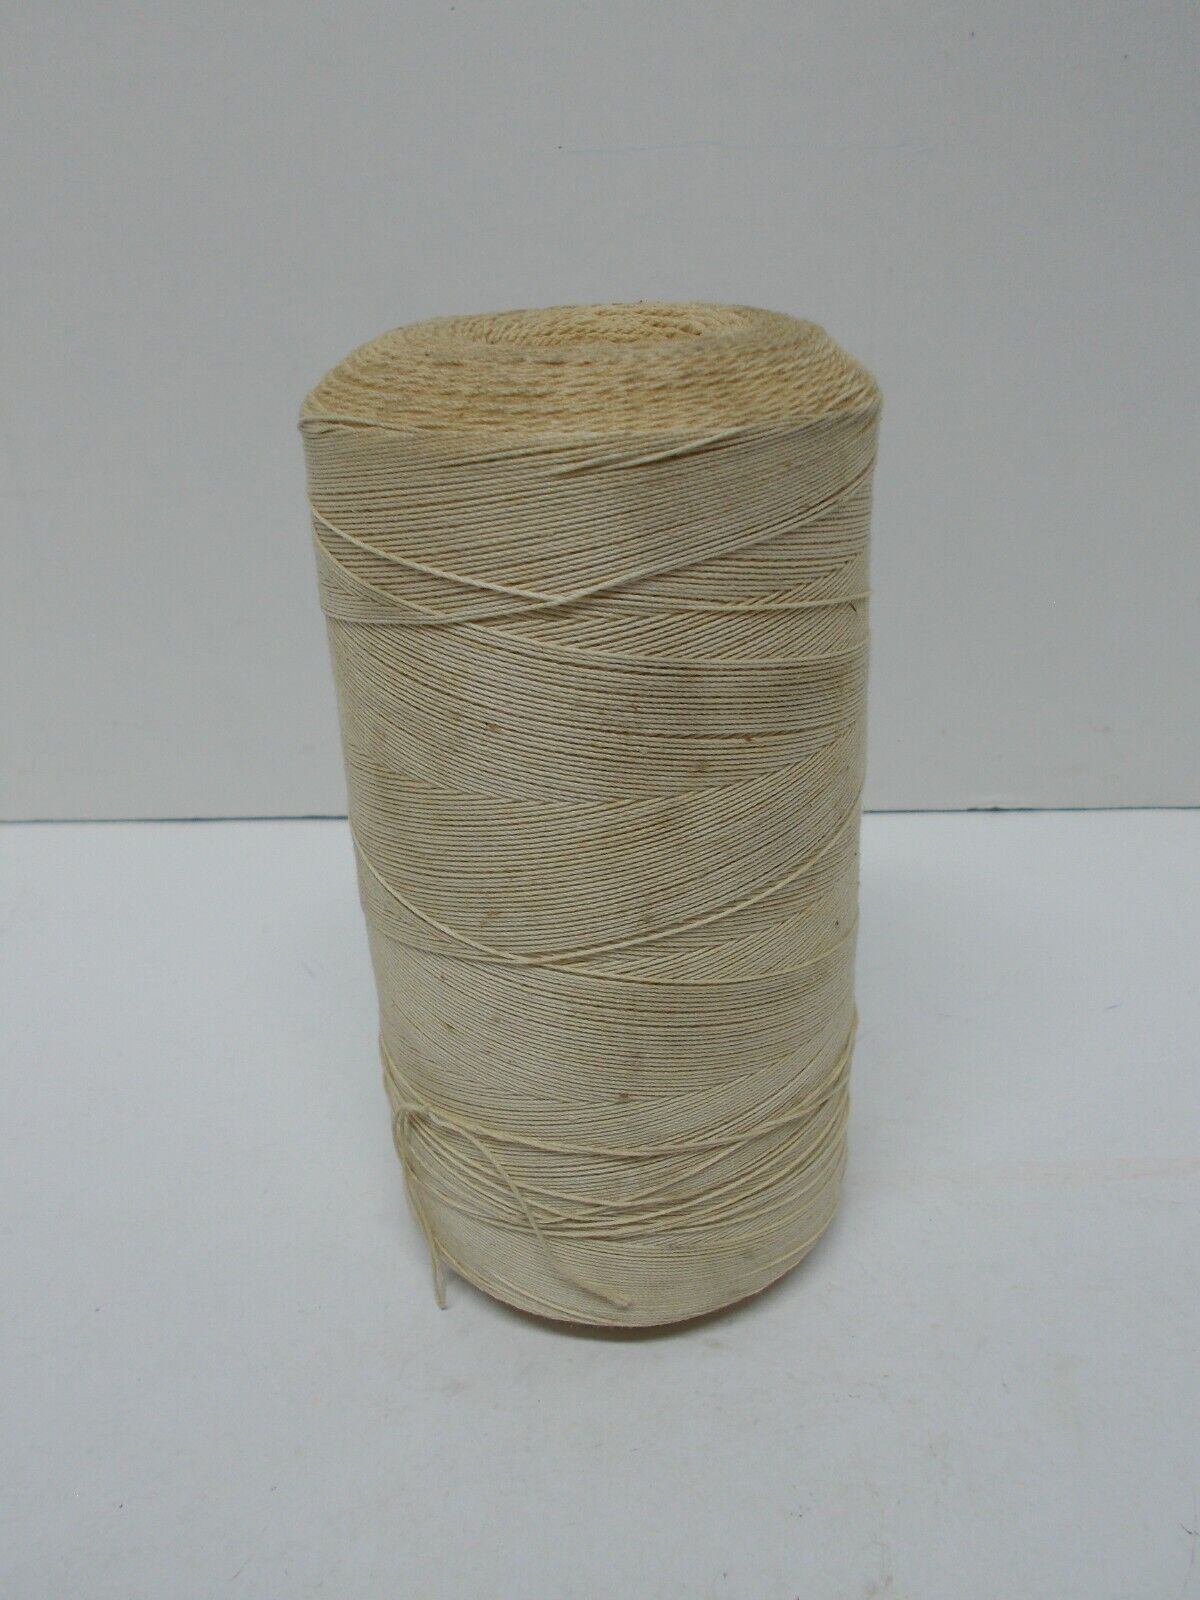 Roll Of Packaging Twine For Tying Pastry/ Donut Boxes Closed